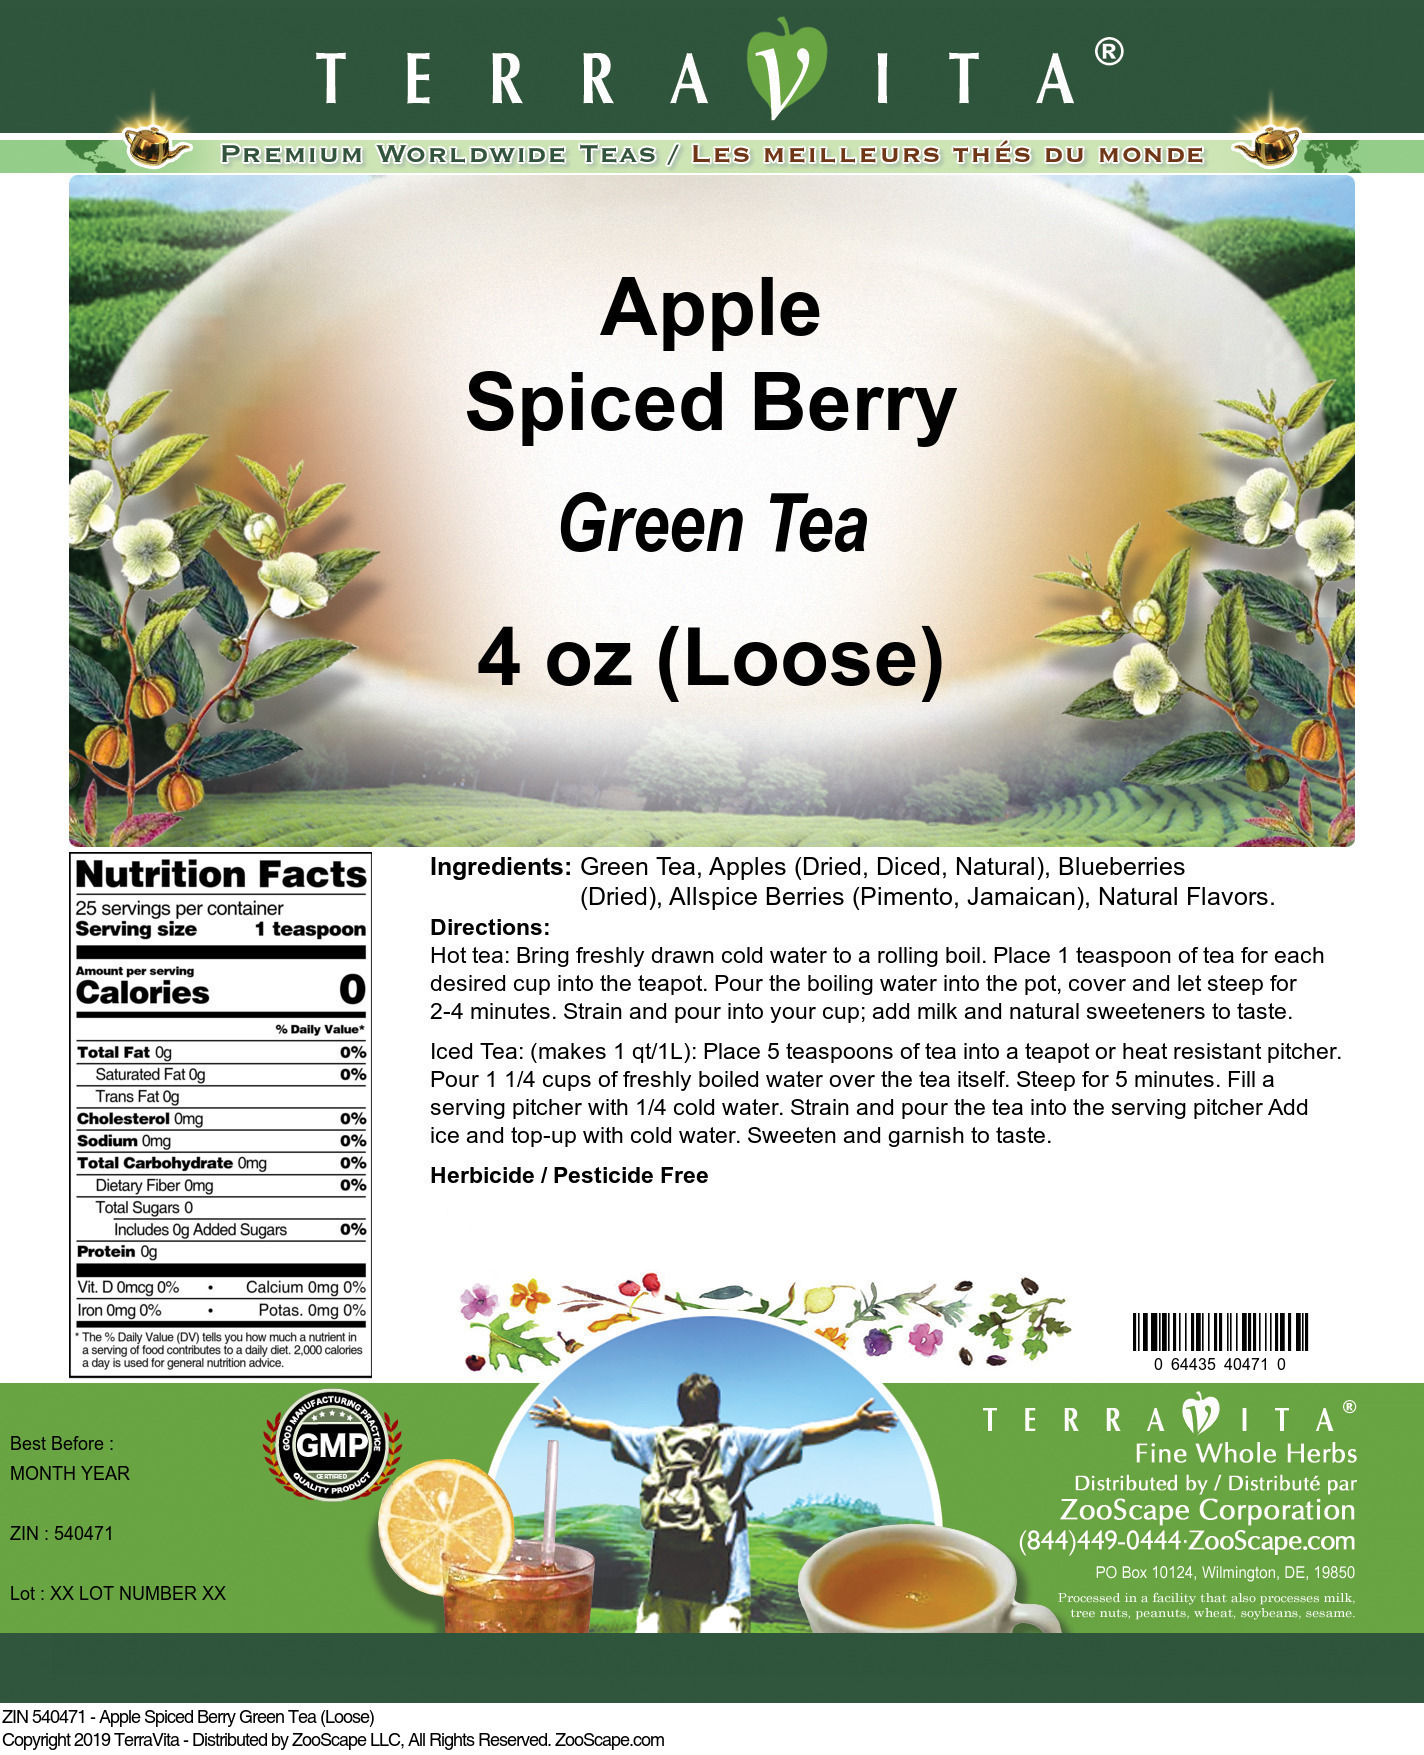 Apple Spiced Berry Green Tea (Loose) - Label